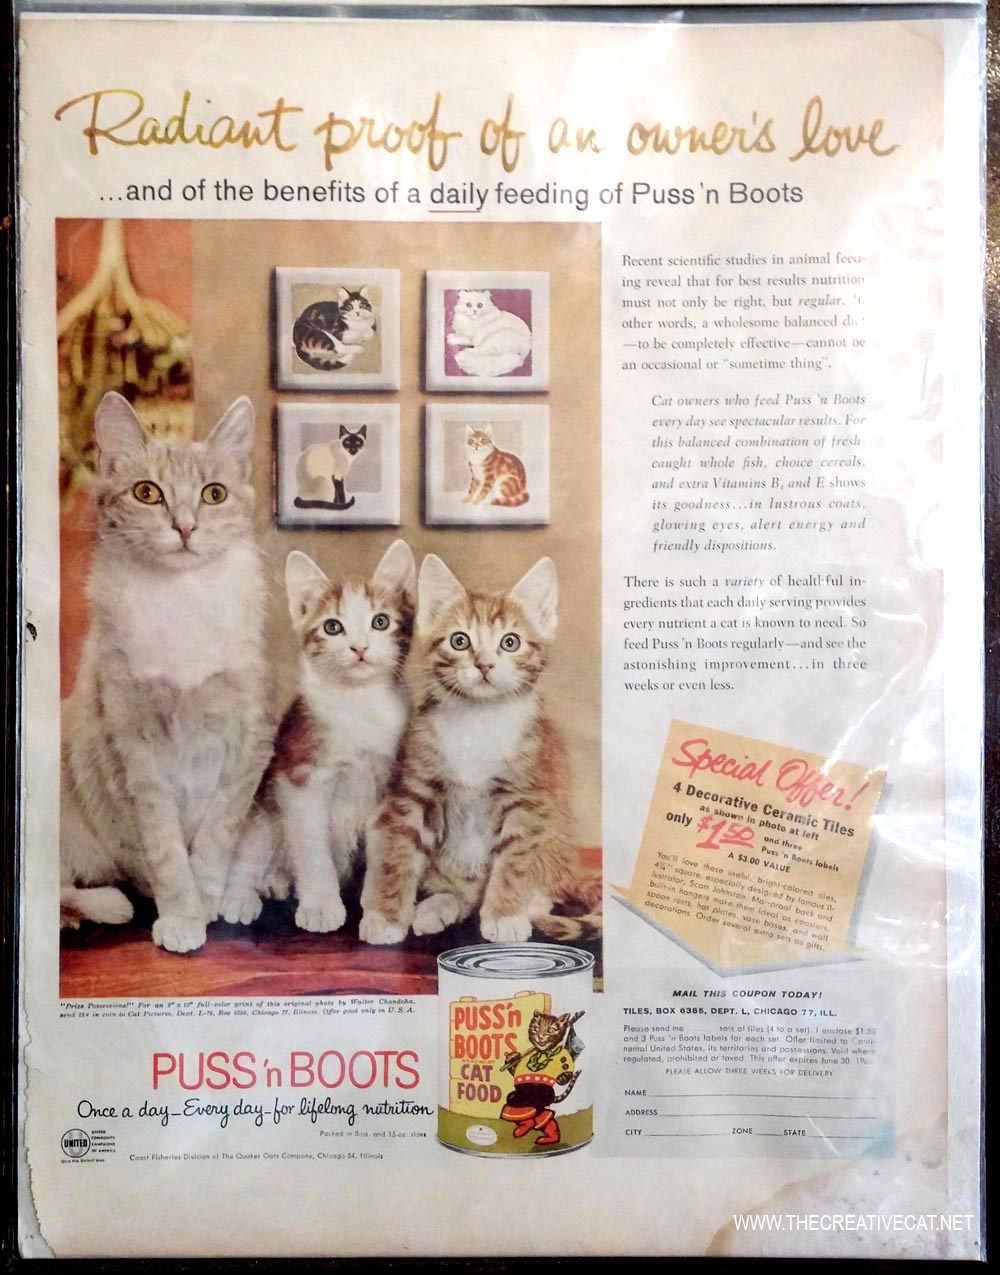 photo by Walter Chandoha from puss n boots ad